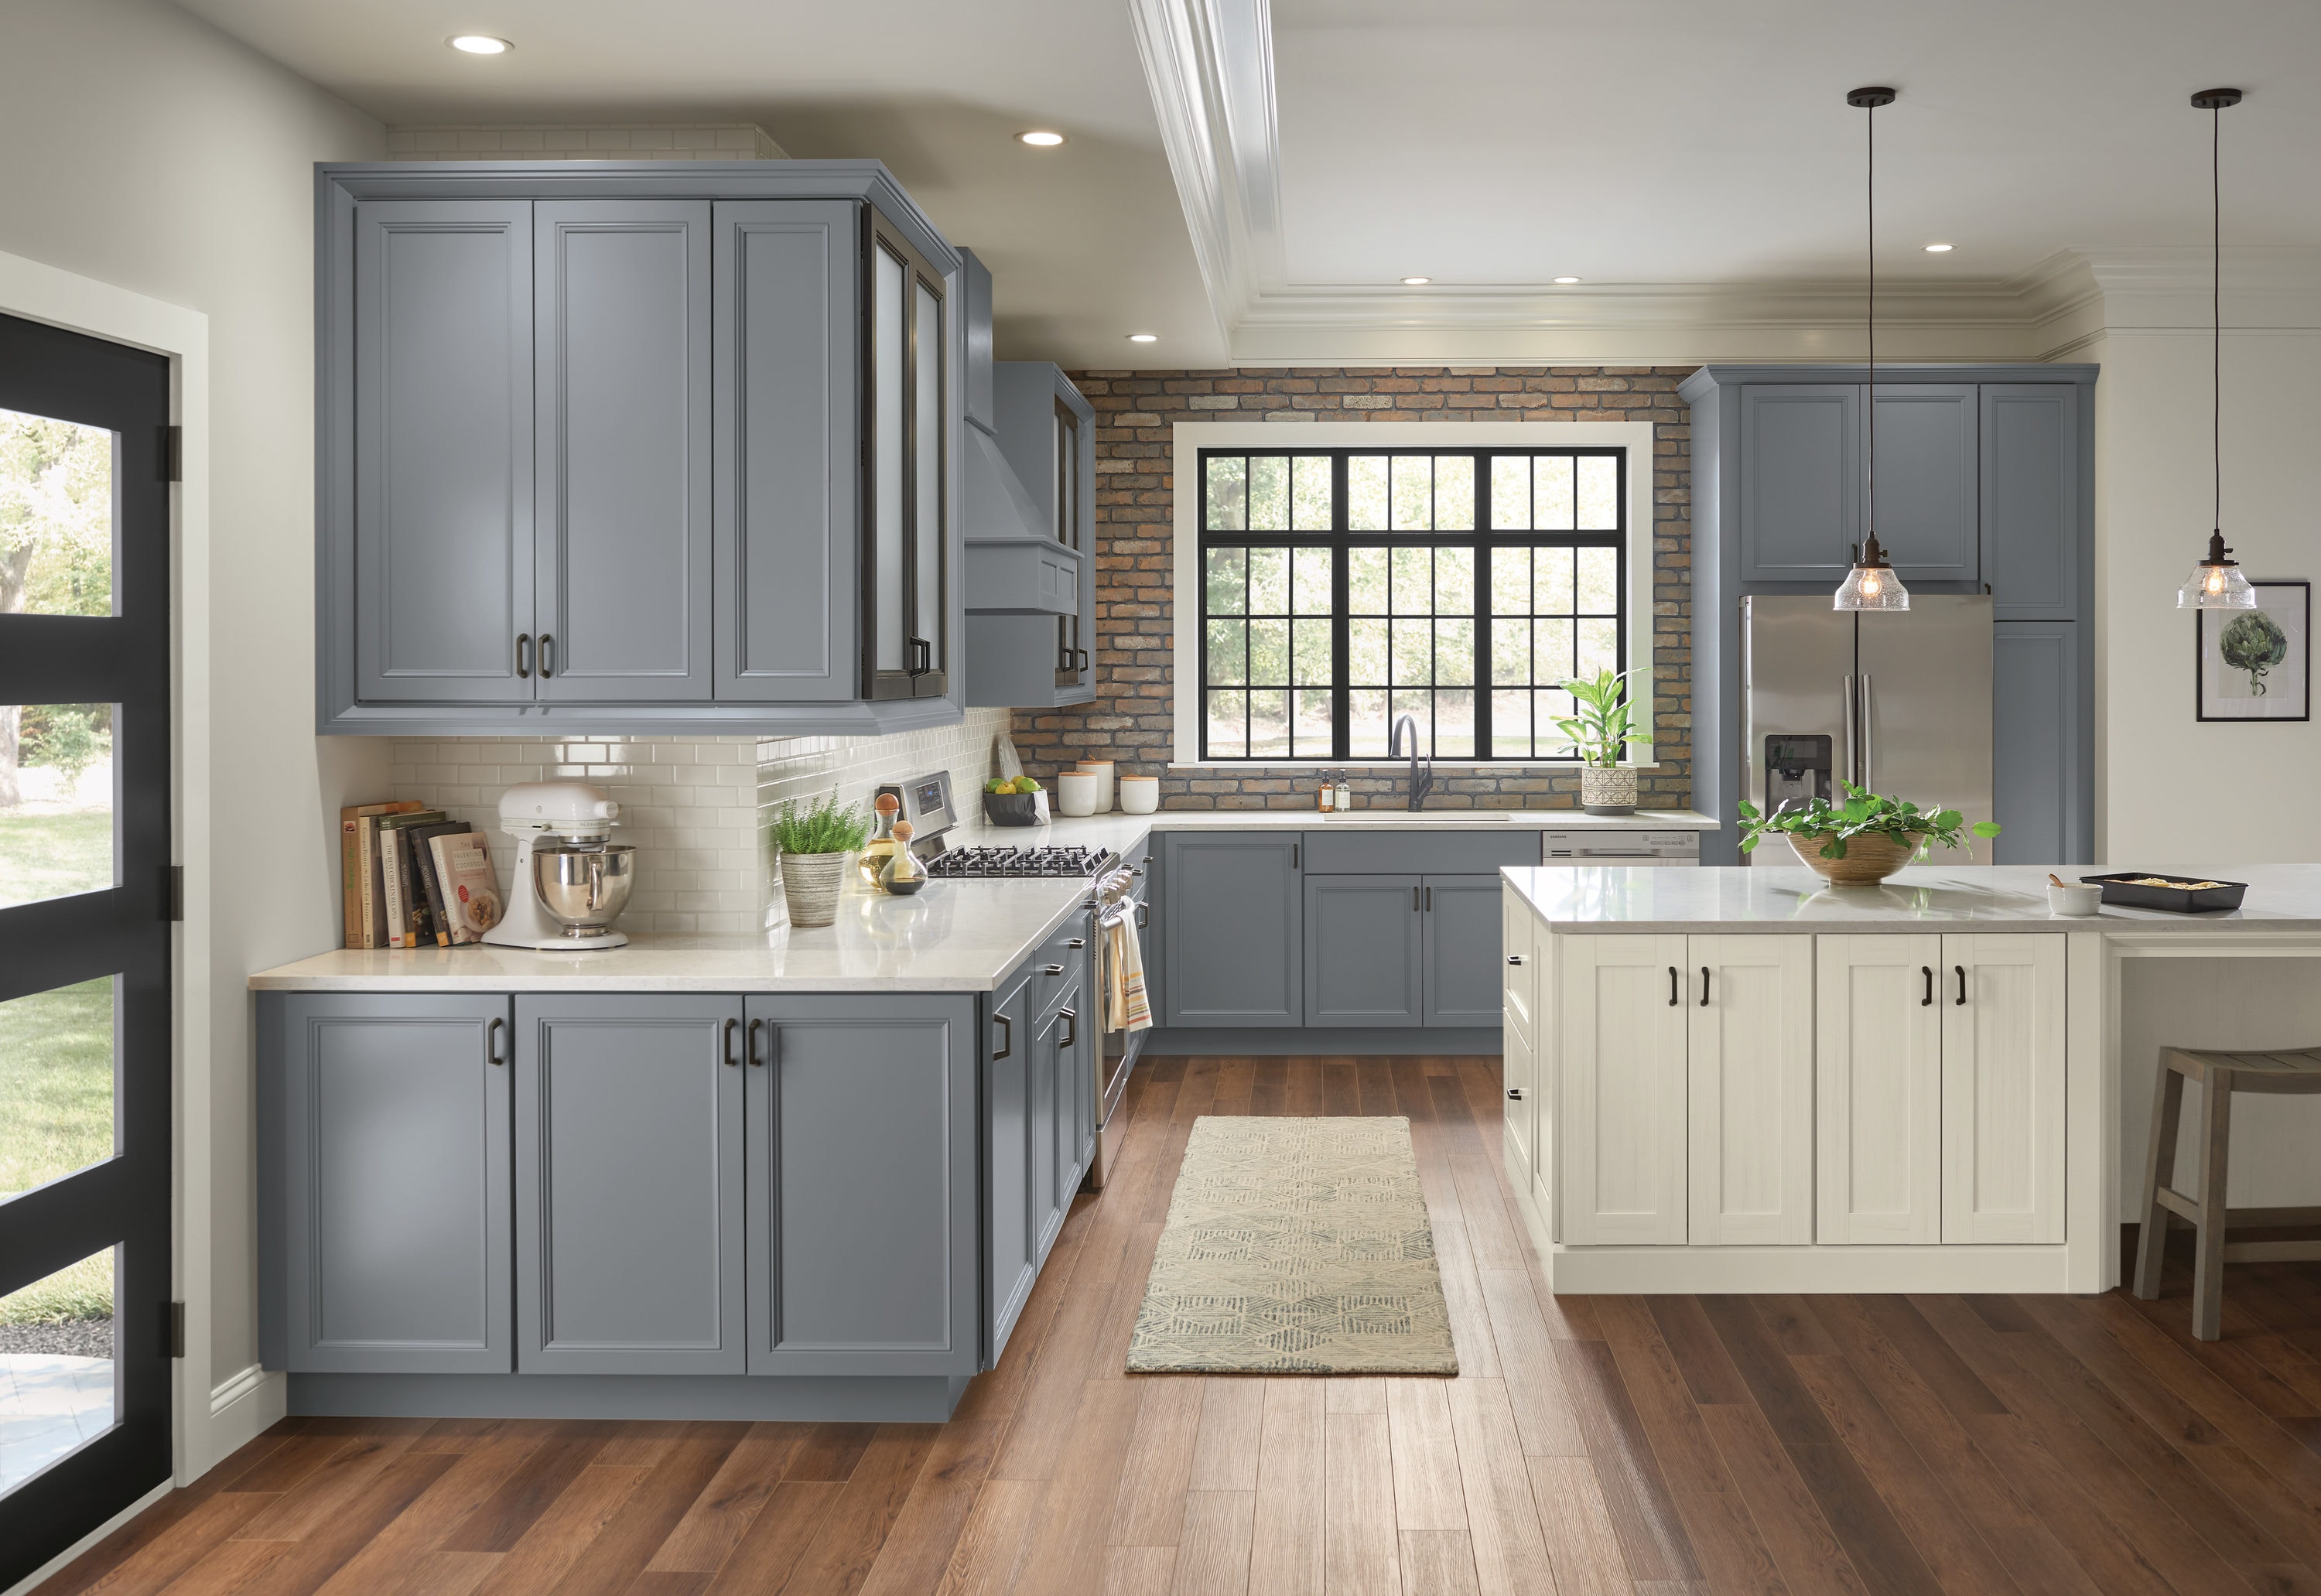 Diamond Jamestown 14.5-in W x 14.5-in H Serious Gray Painted Maple ...